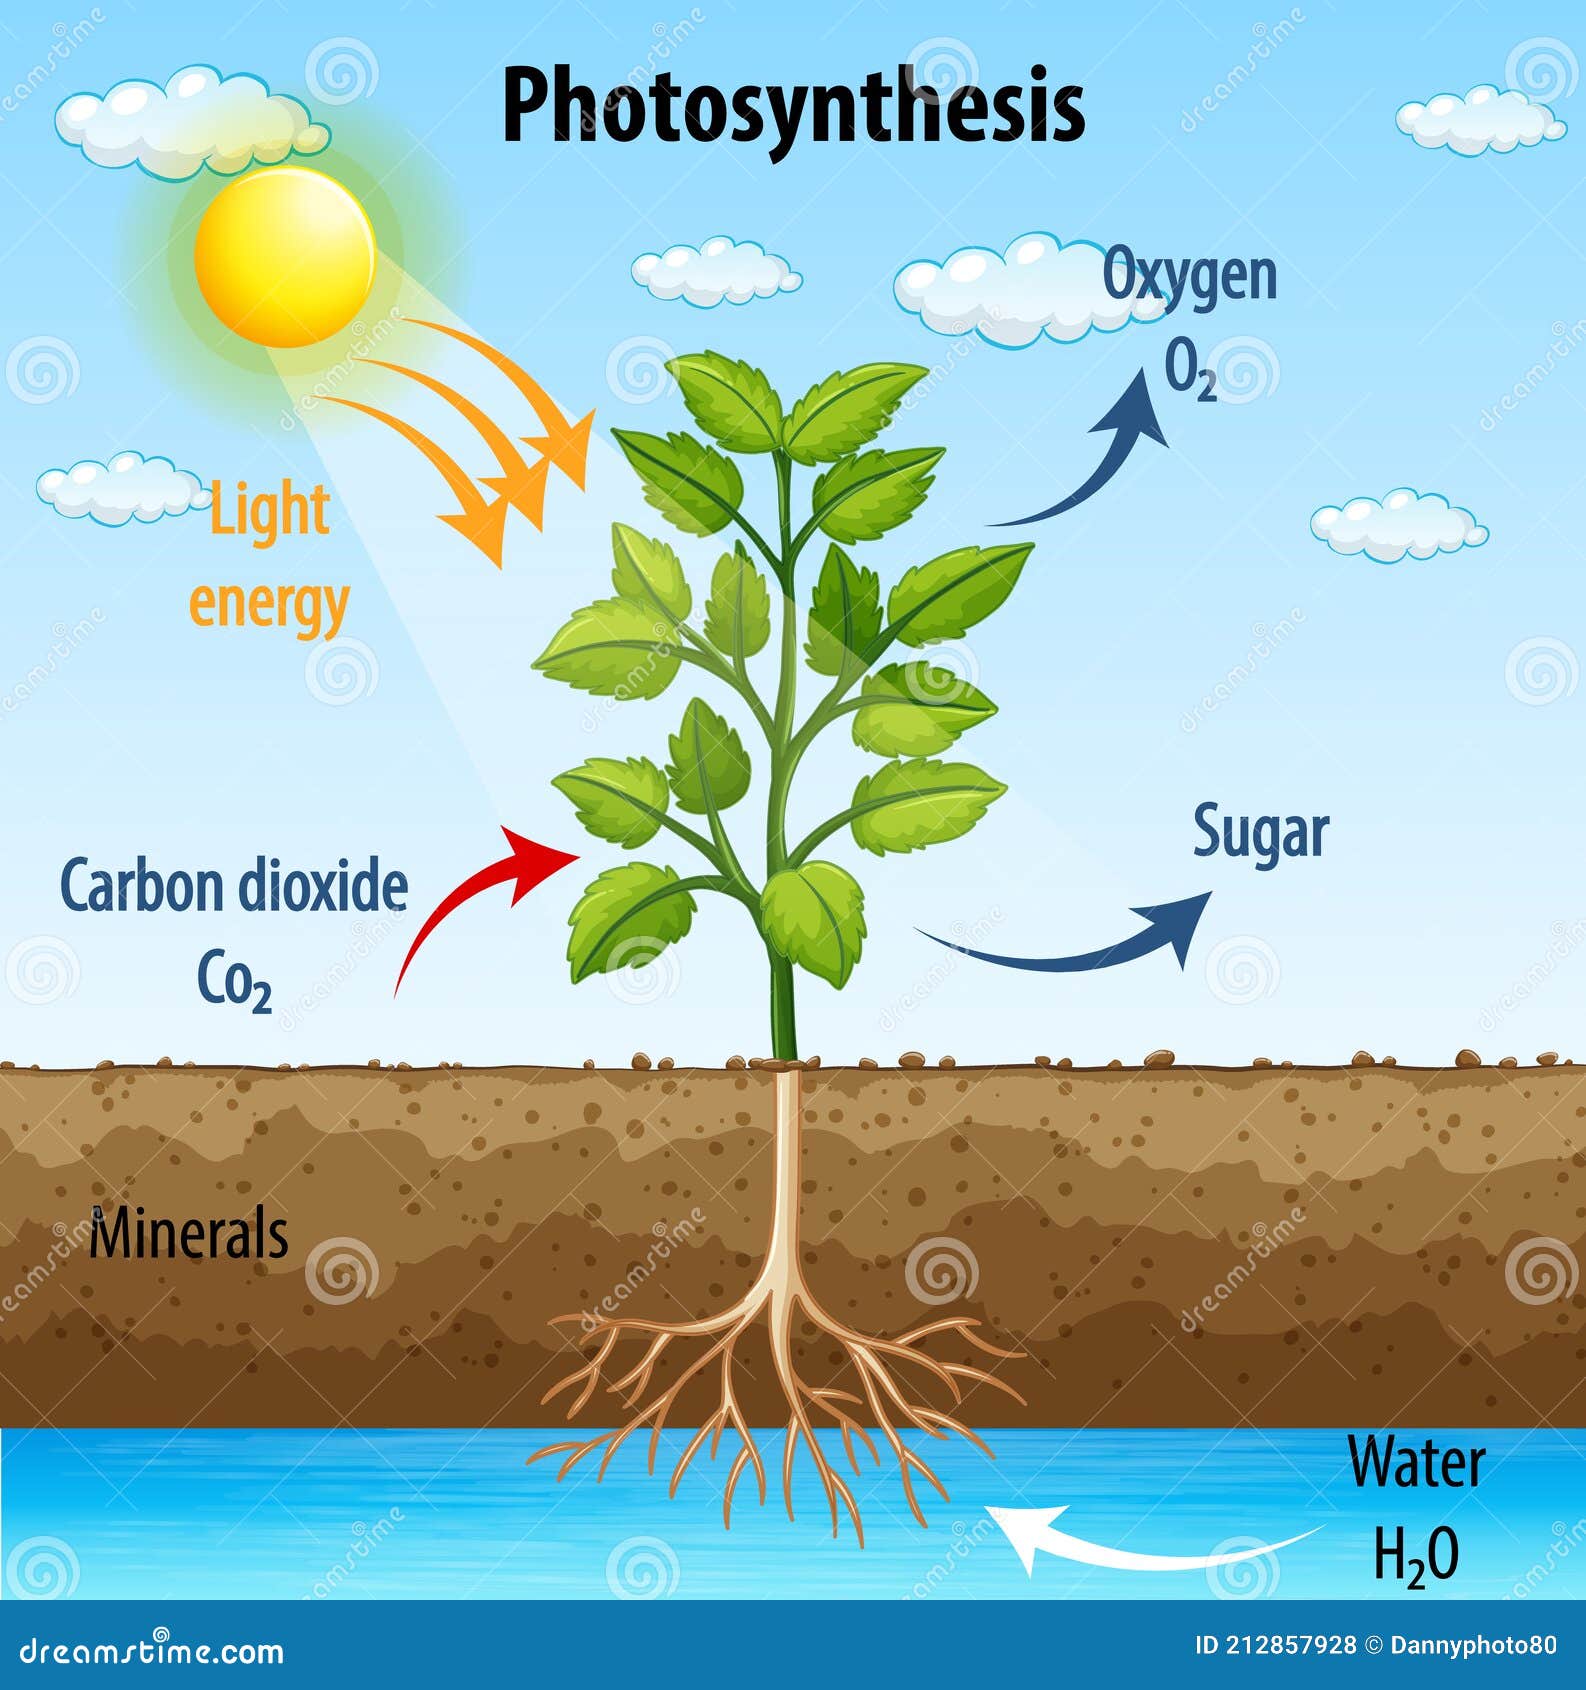 Photosynthesis Process Stock Illustrations 640 Photosynthesis Process Stock Illustrations Vectors Clipart Dreamstime